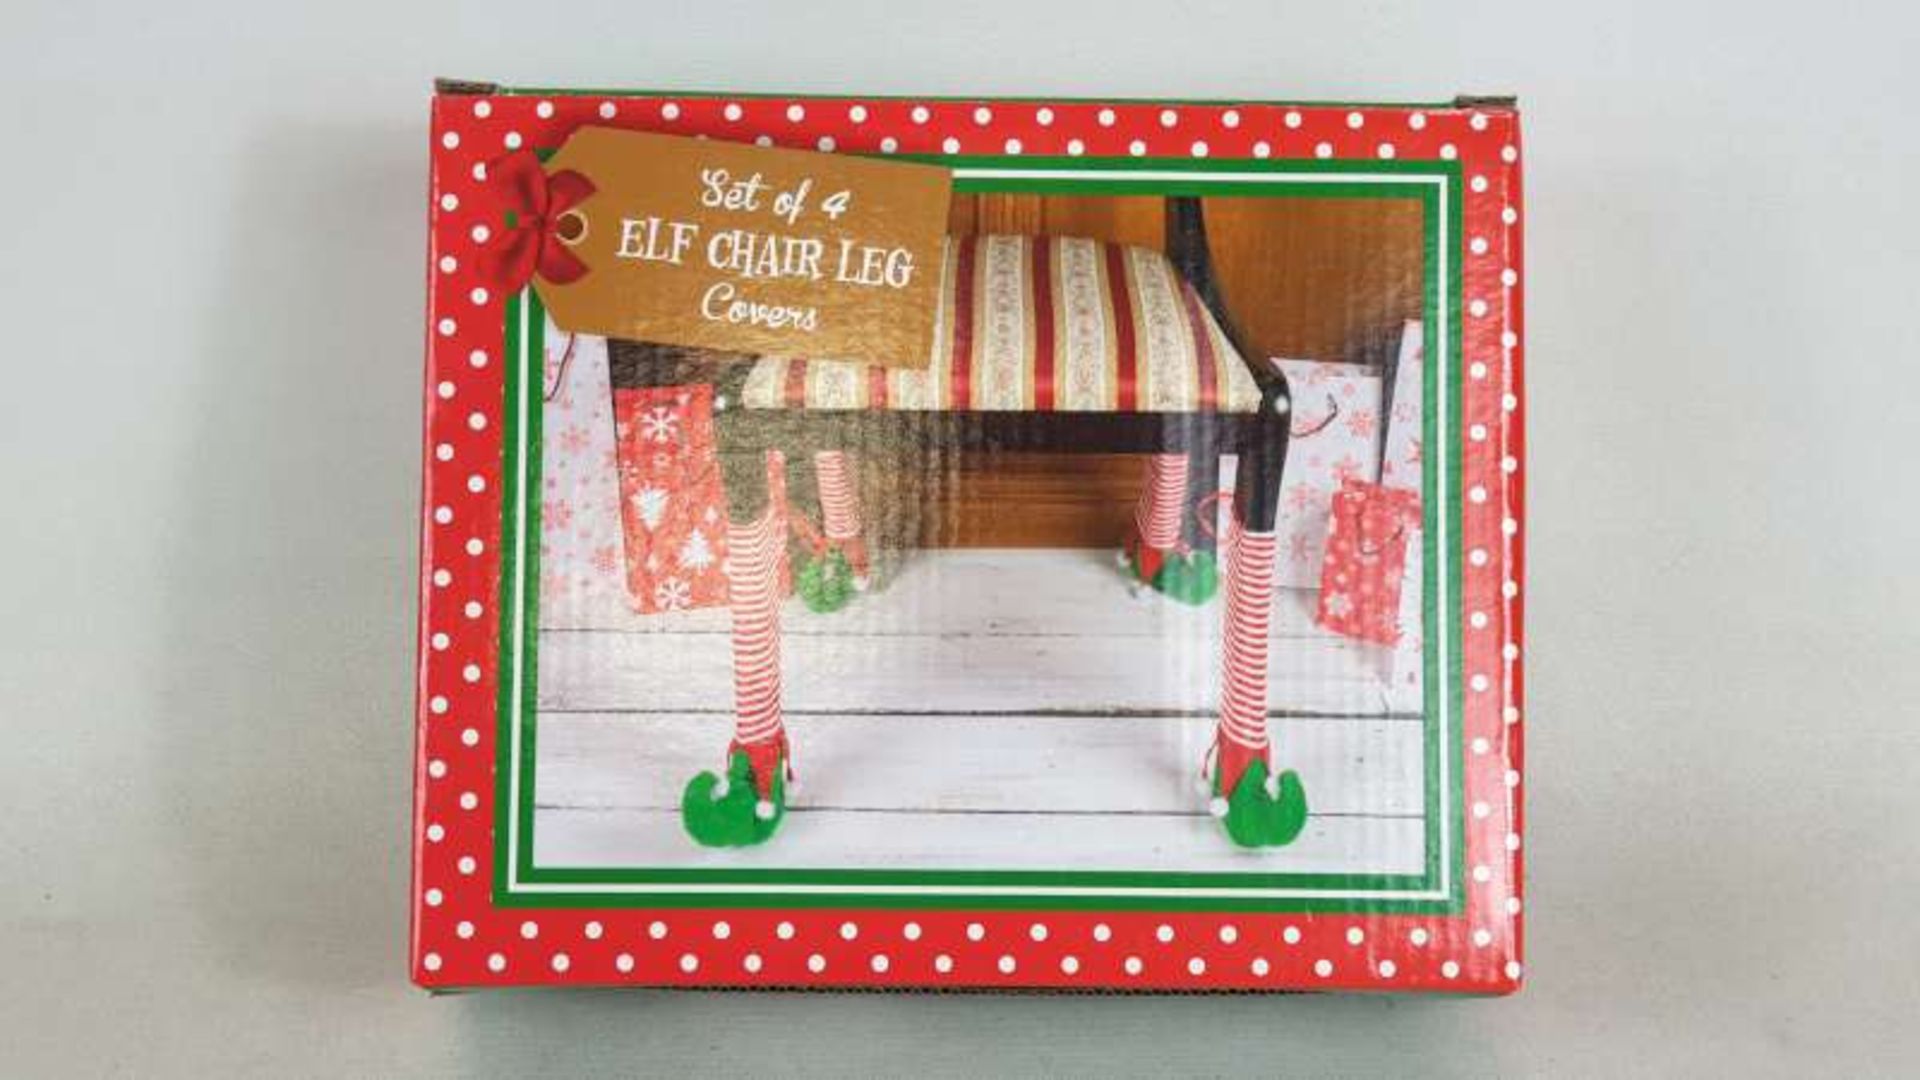 80 X BRAND NEW BOXED SET OF ELF CHAIR LEG COVERS IN 4 BOXES